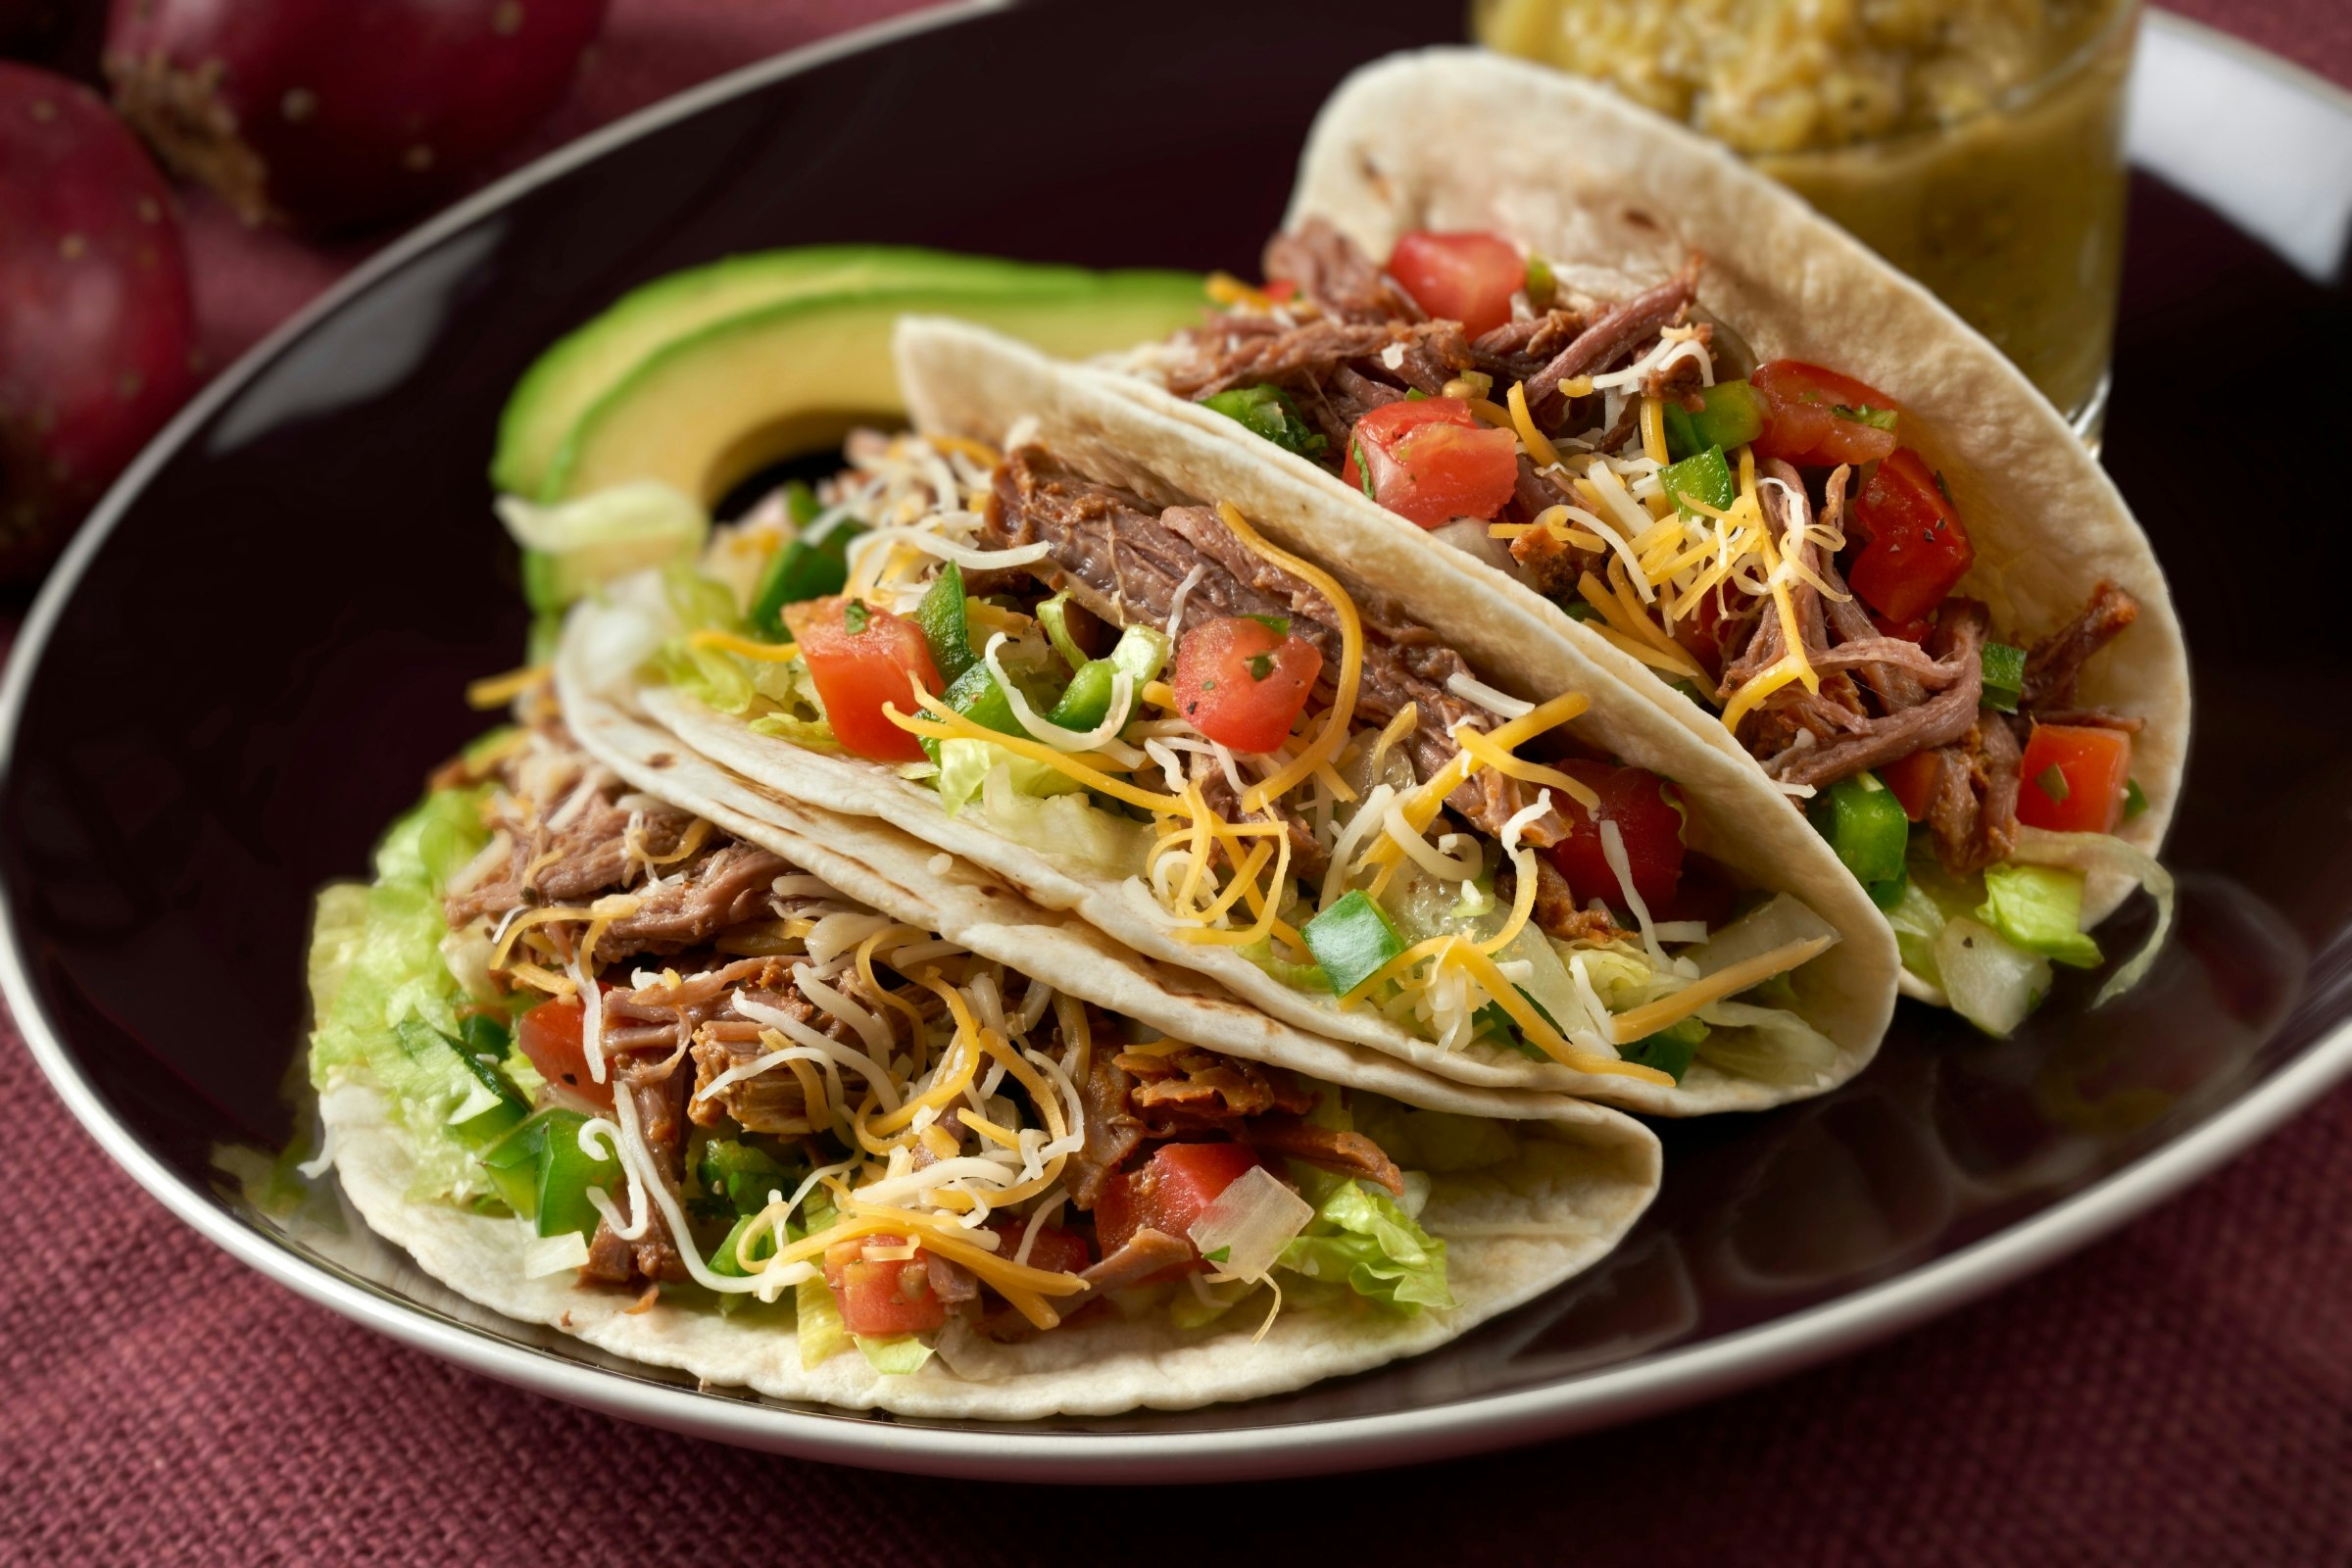 Three meat tacos (with ingredients encased in a corn tortilla) rest on a circular black plate. The tacos are also stuffed with various vegetables and sauces.